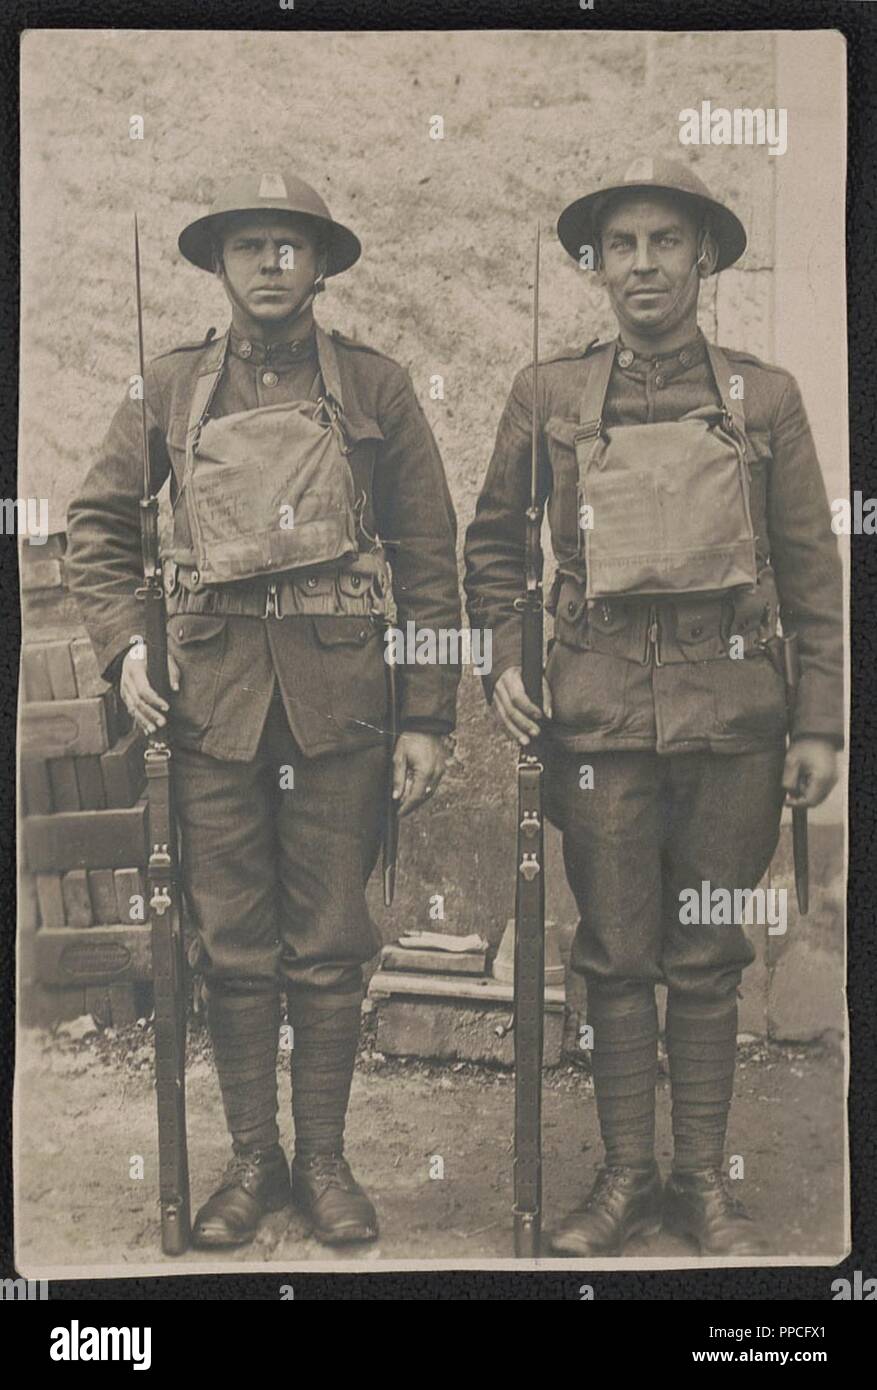 Two Soldiers of the 77th Infantry Division. The divison was made up of Soldiers drafteed from New York City and was known as the Metropolitan Division. In October 1918 540 of the division's Soldiers were cut off behind German lines and because known as the Lost Battalion. (Library of Congress) Stock Photo